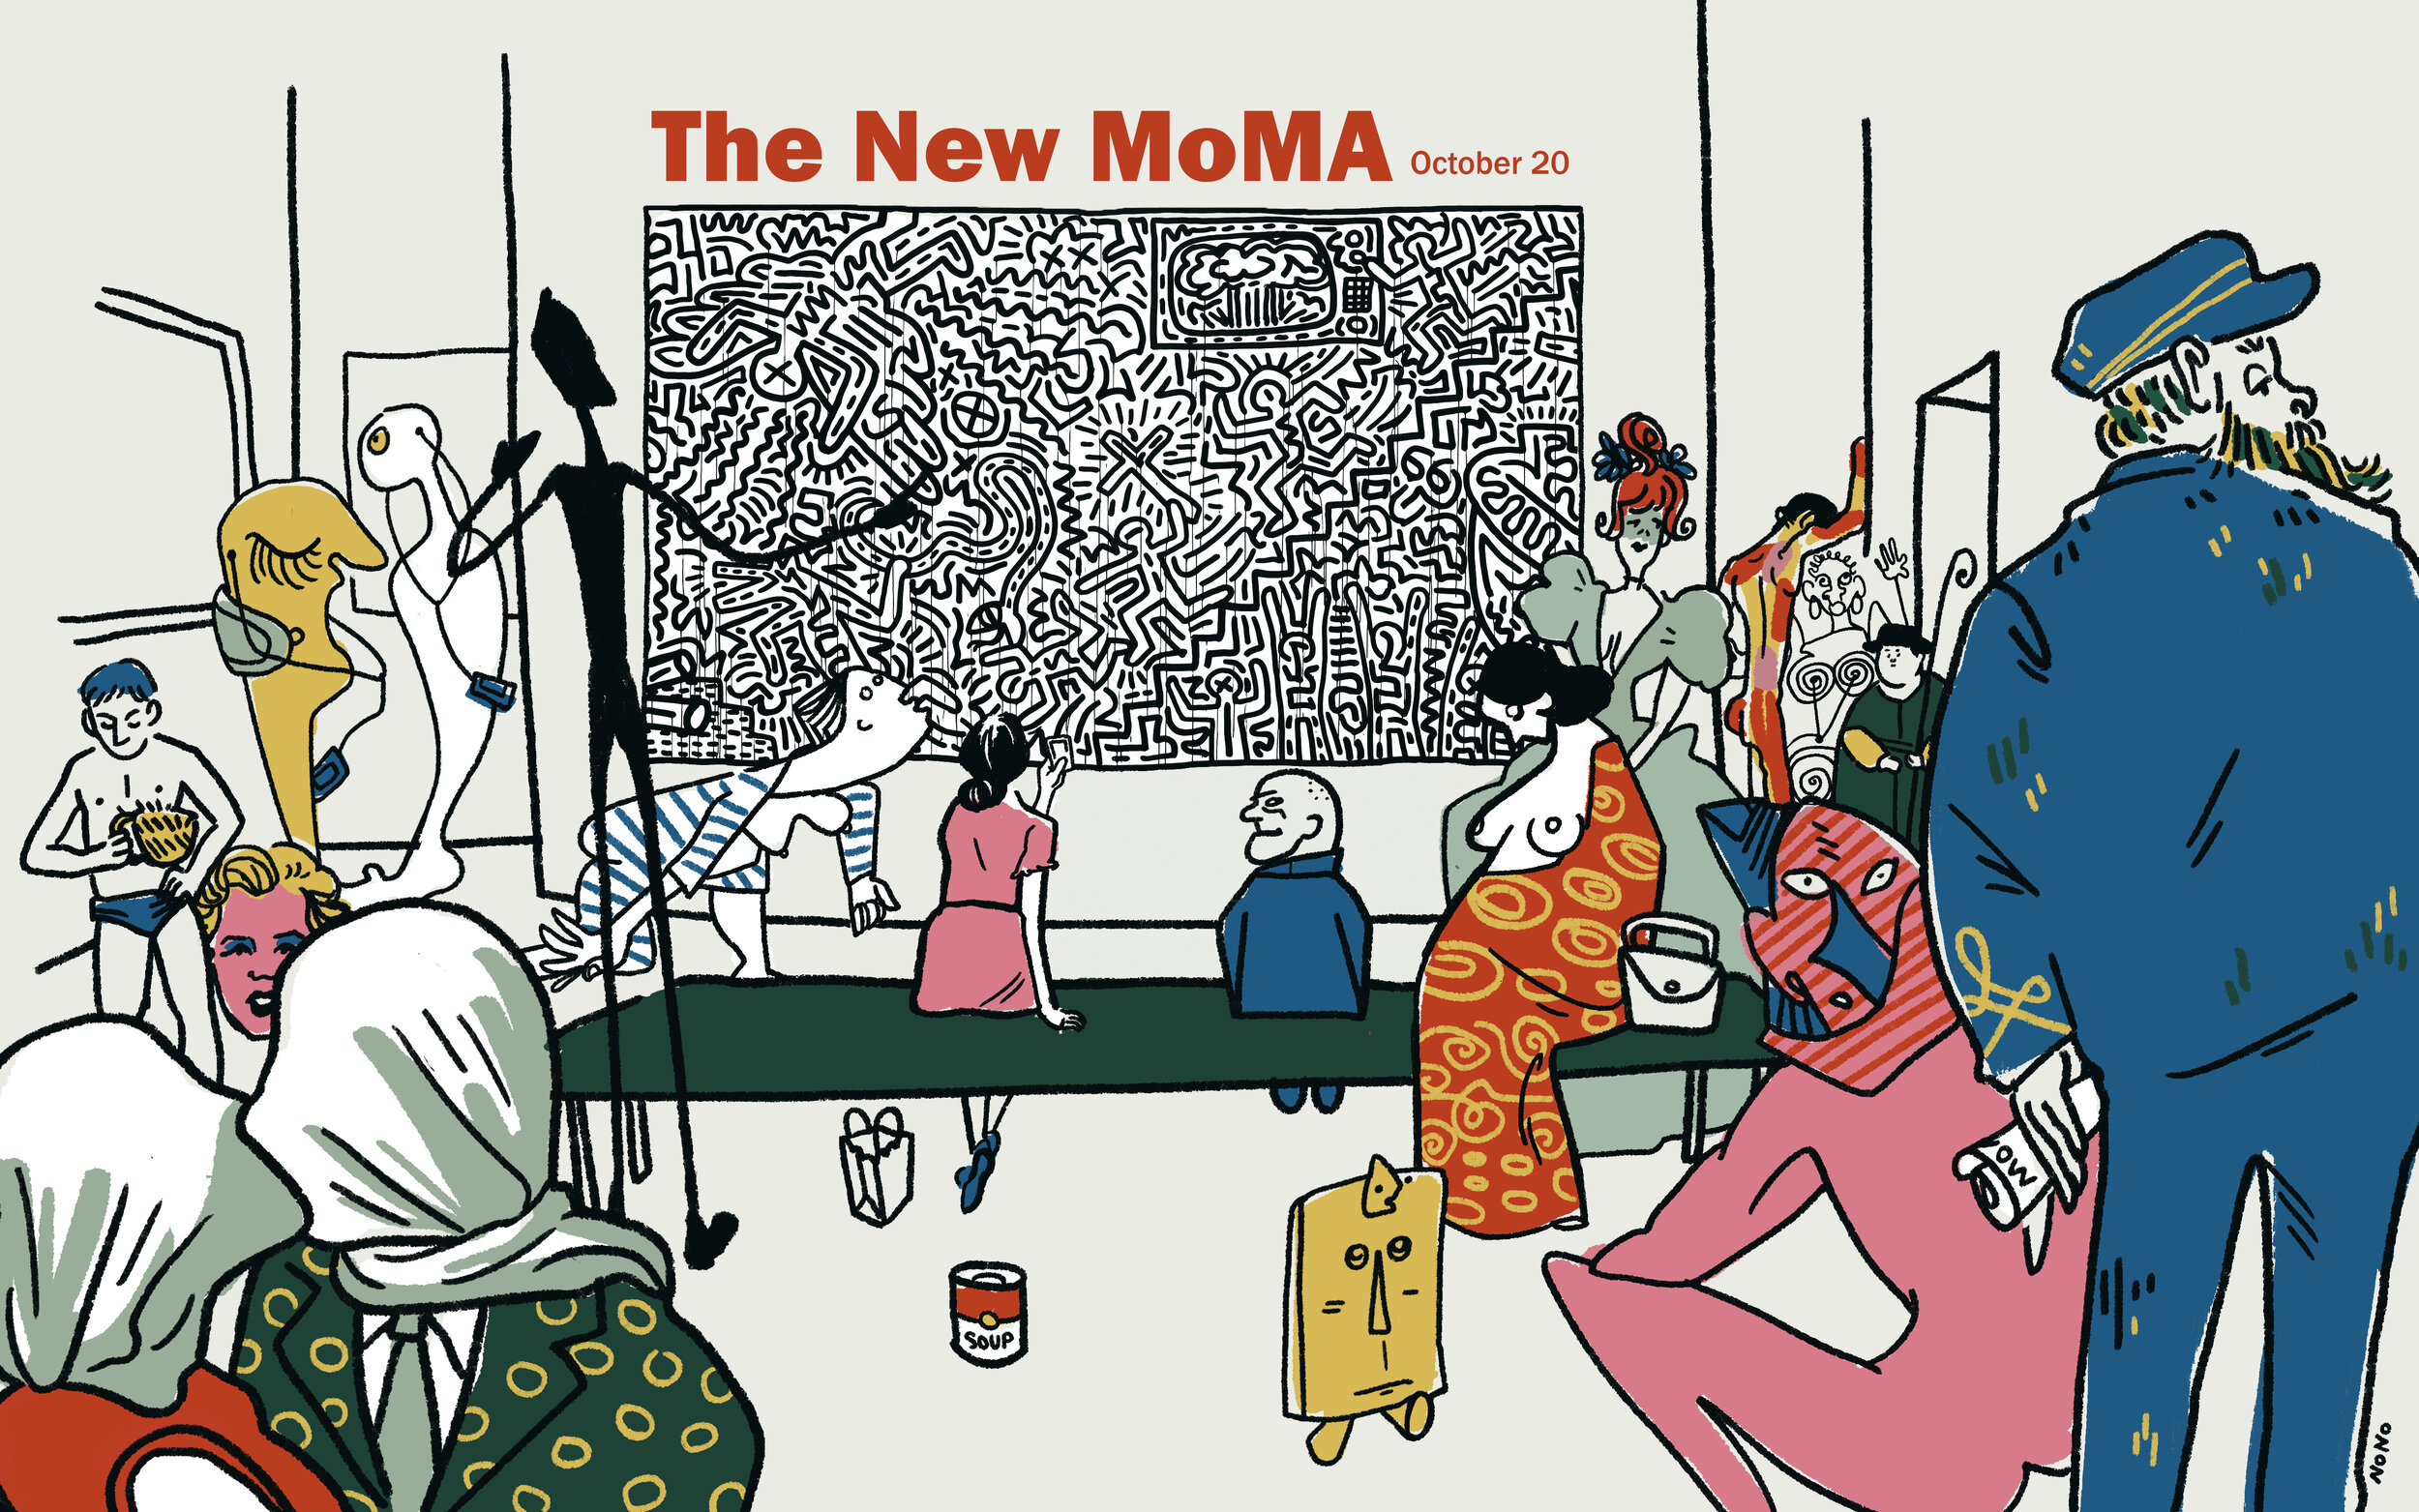 Proposed editorial spread about the reopening of the MoMA